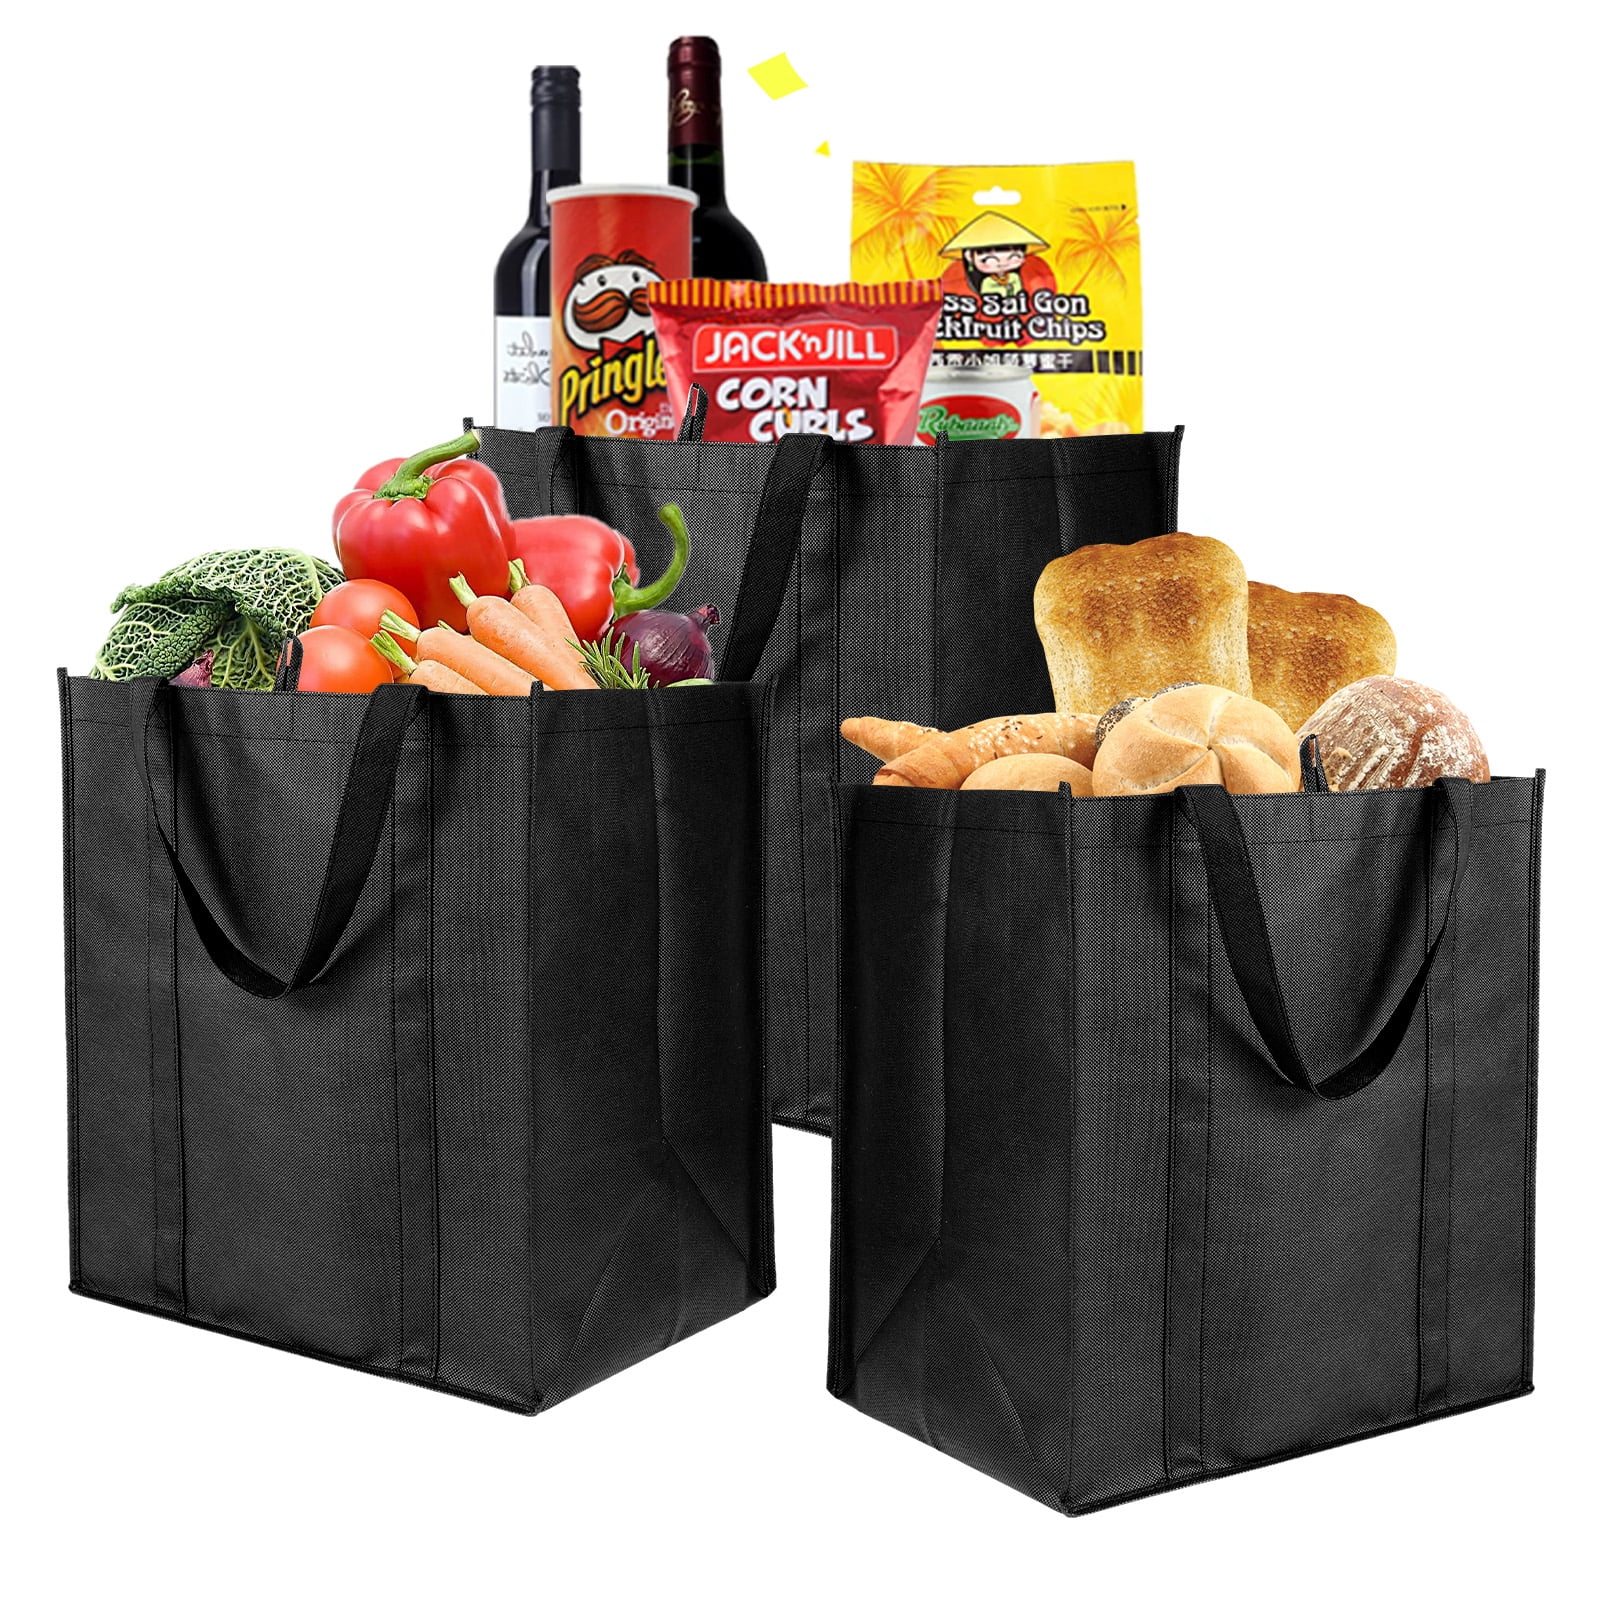 Zenpac Washable Kraft Tote Bag Double Stitched for Multi-Purpose Use Grocery Eco Friendly Recyclable Durable Heavy-Duty Reusable Shopping Bag